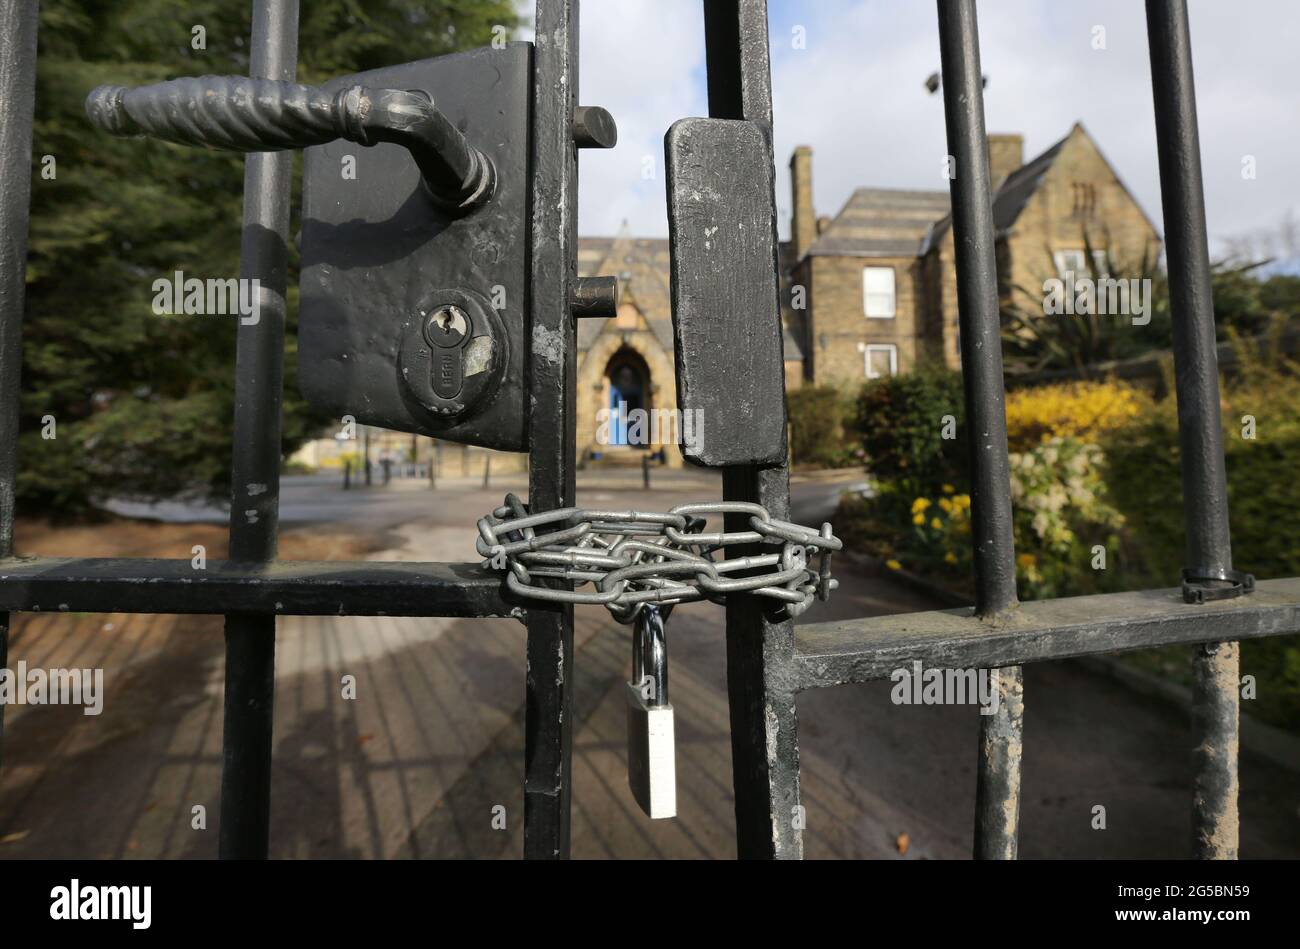 Batley Grammar School, a local grammar school in Batley seen closed.At a time when the area is to elect a new MP in a by-election, the controversial local grammar school; Batley Grammar School is still making news following a suspension of a teacher and later the school was shut after the teacher showed a controversial image of the prophet Muhammad to his pupils while discussing blasphemy and racism during an Religious Education (RE) class. The school was closed after two days of protests by locals who called for the teacher to be dismissed. The teacher and his family have moved anonymously as Stock Photo